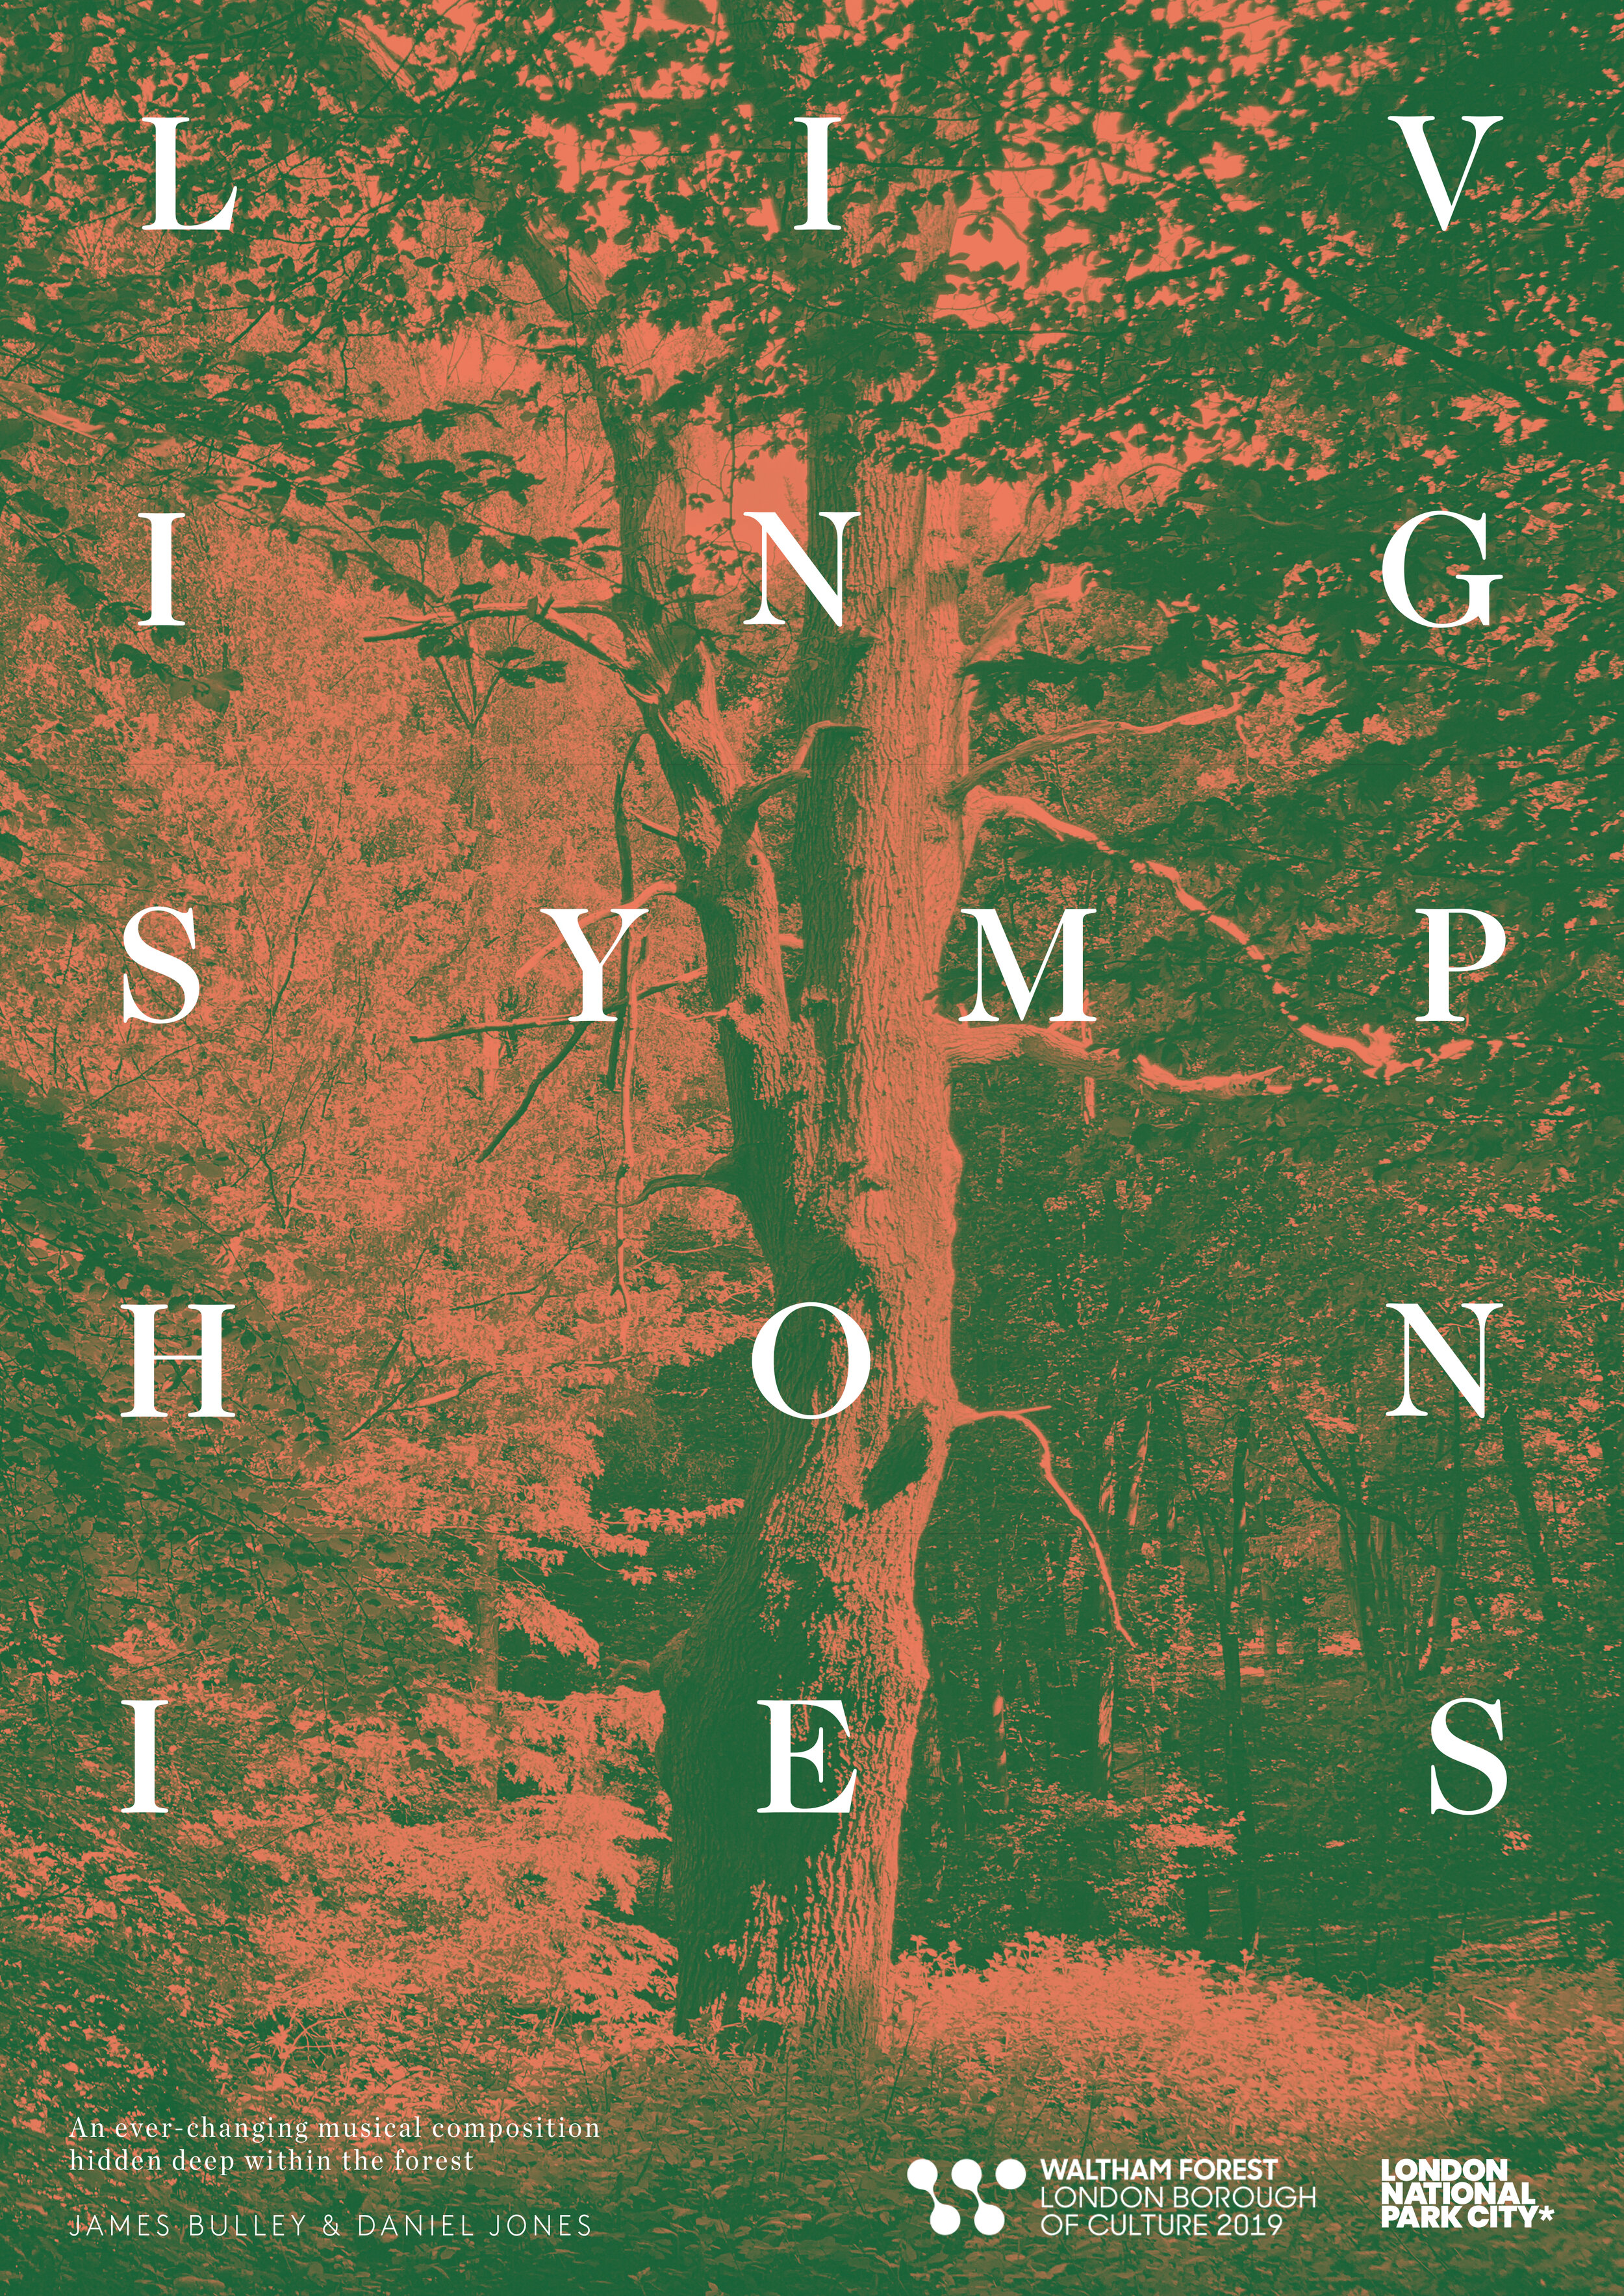   Living Symphonies  Epping Forest Poster (2019) Design: Patrick Fry 